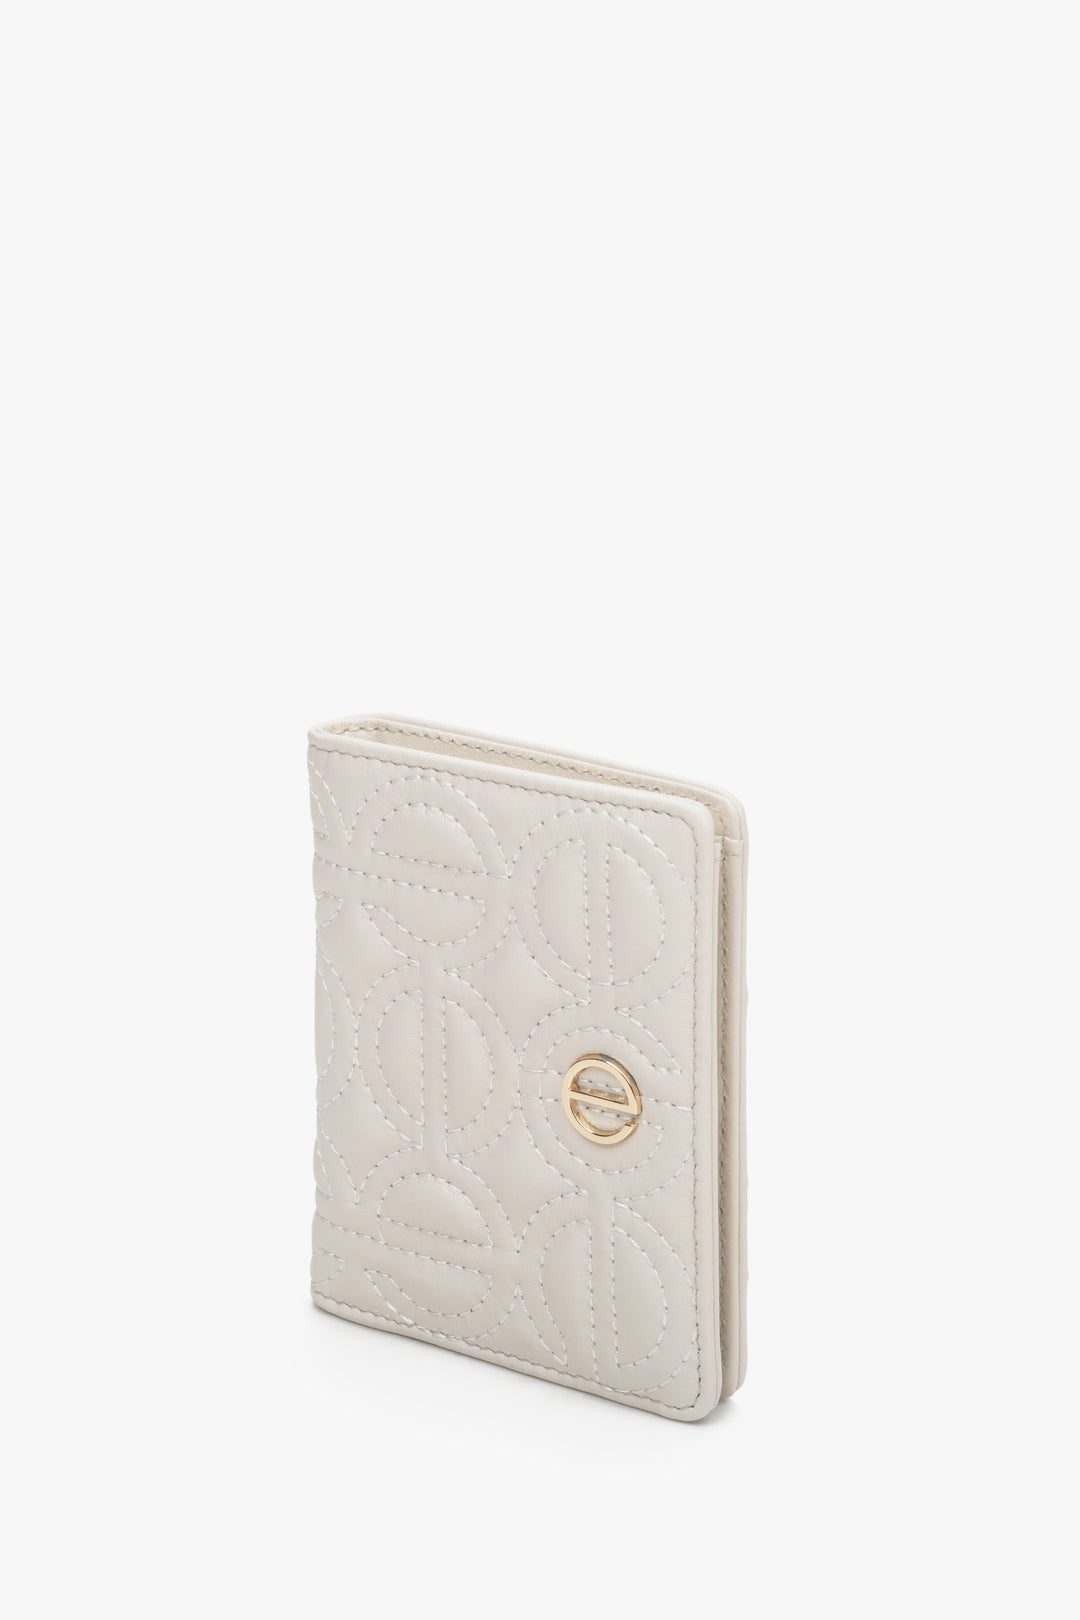  Leather, small women's card wallet in light beige with gold accents by Estro.